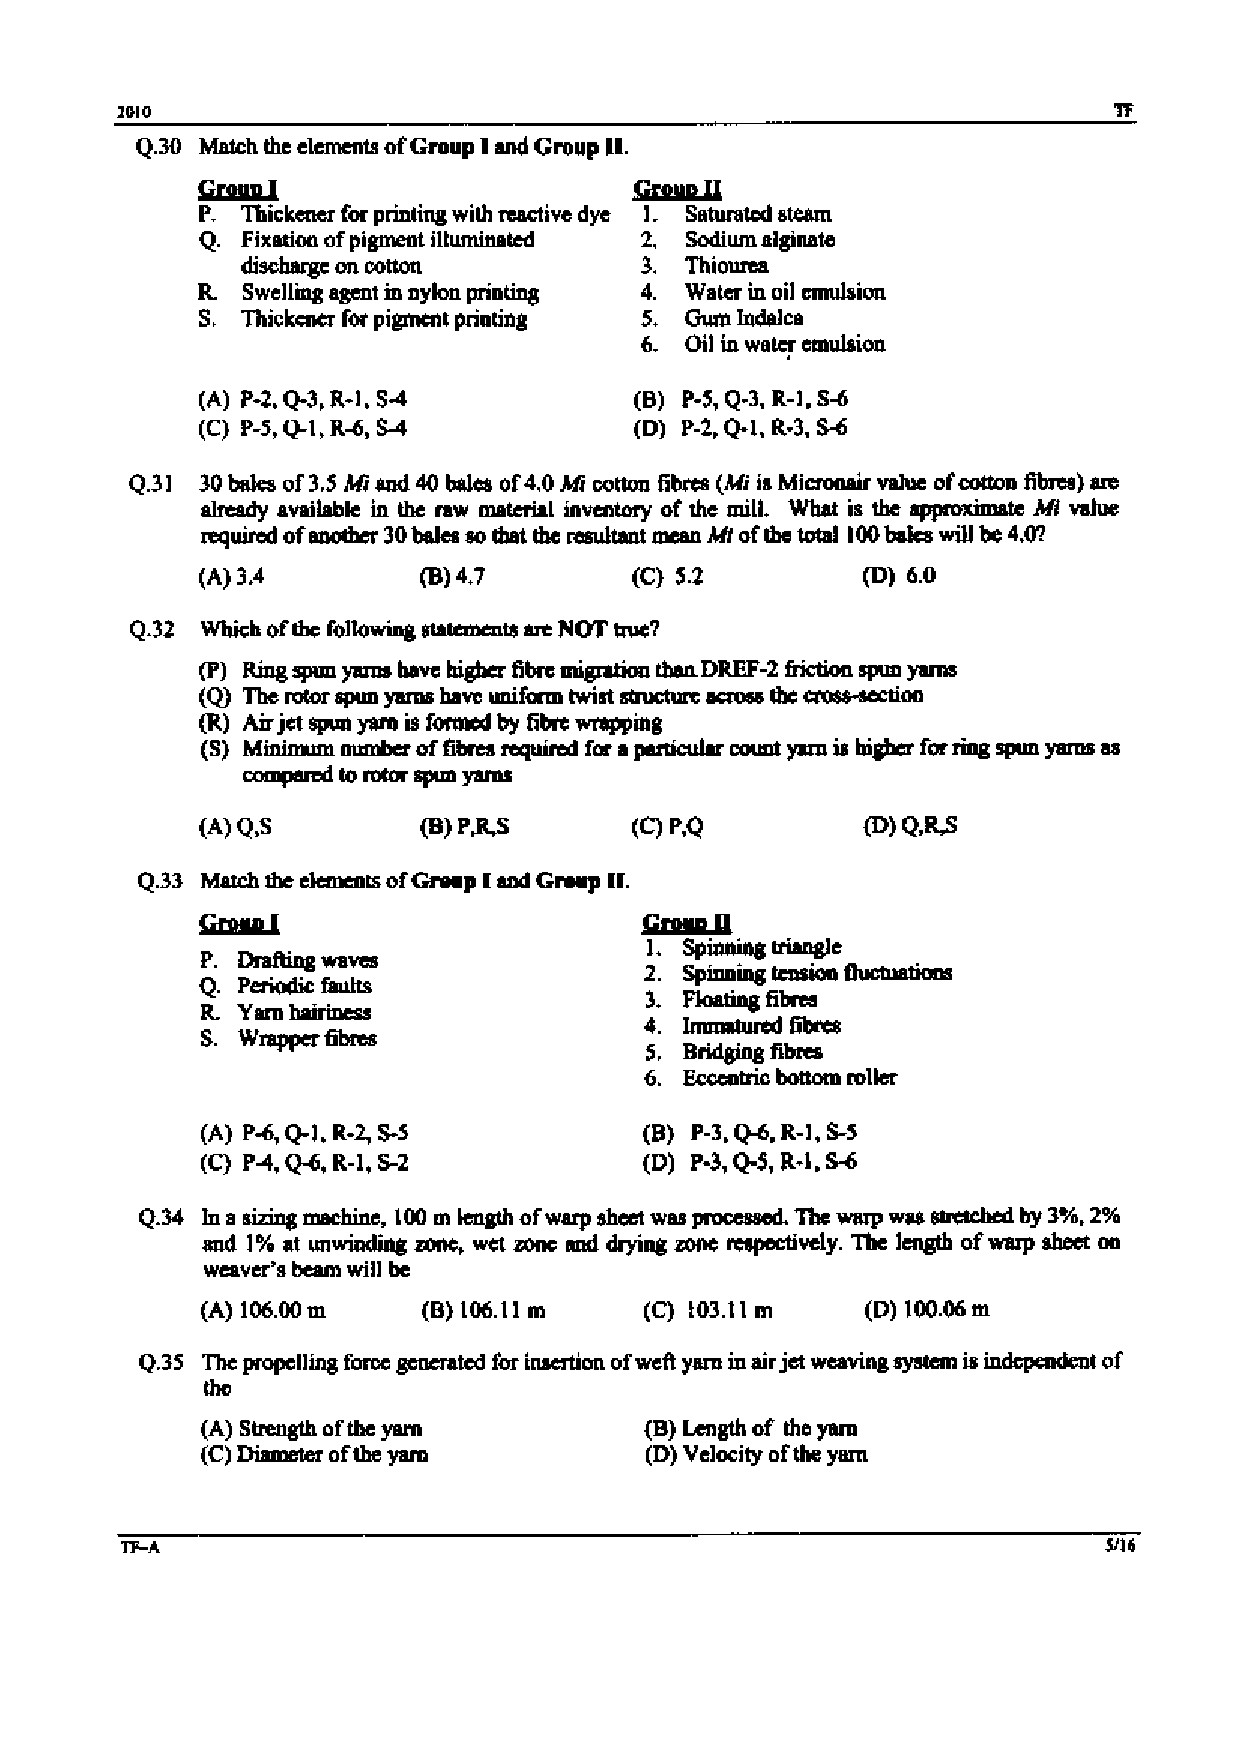 GATE Exam Question Paper 2010 Textile Engineering and Fibre Science 5